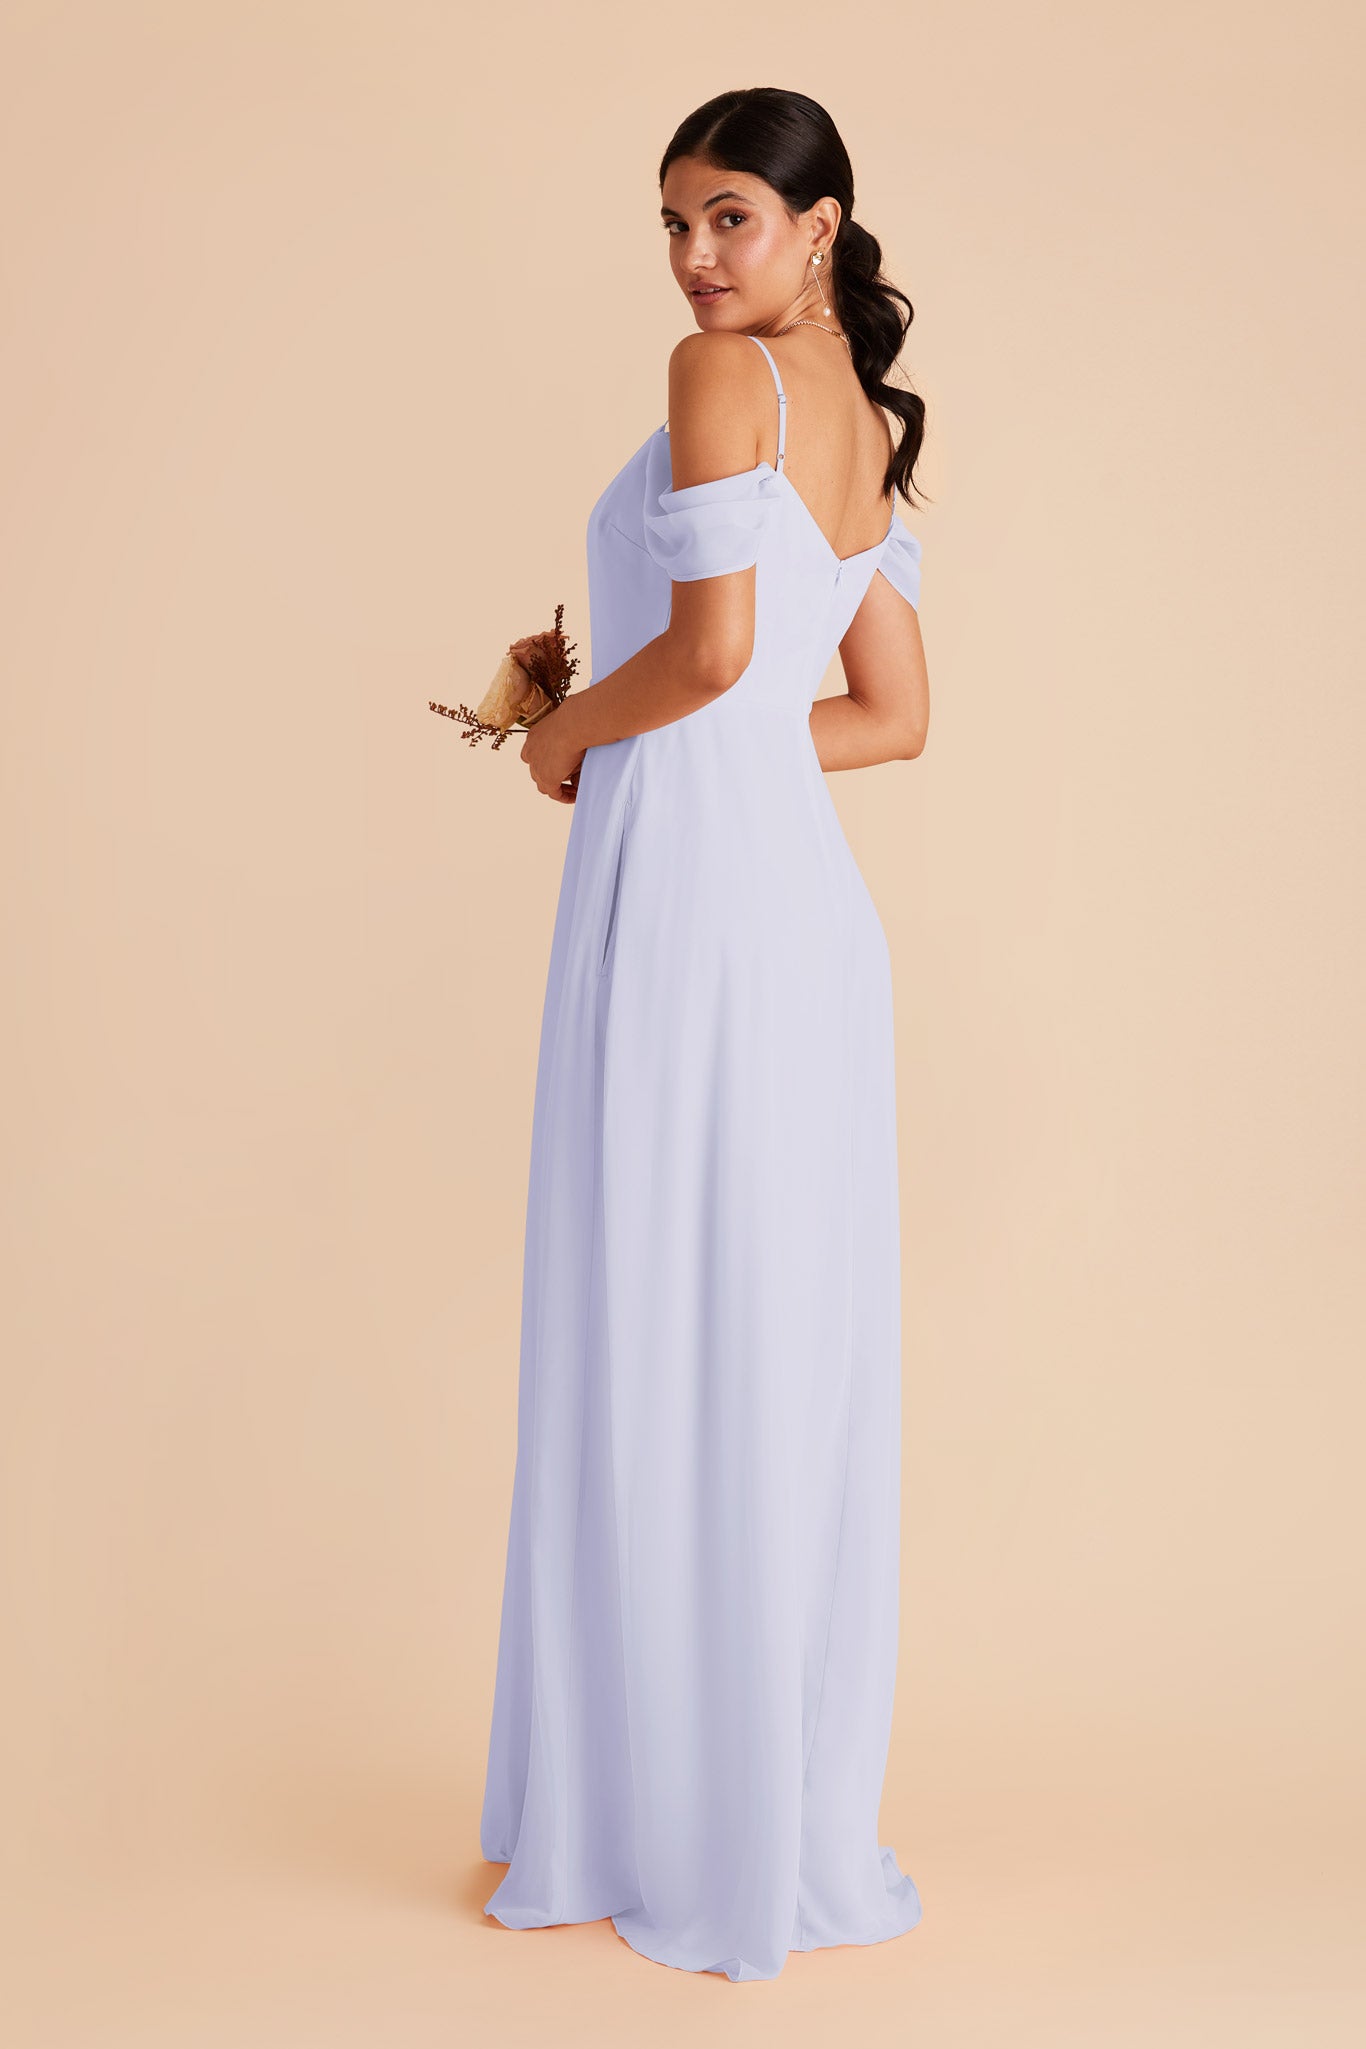 Periwinkle Blue Devin Convertible Dress by Birdy Grey